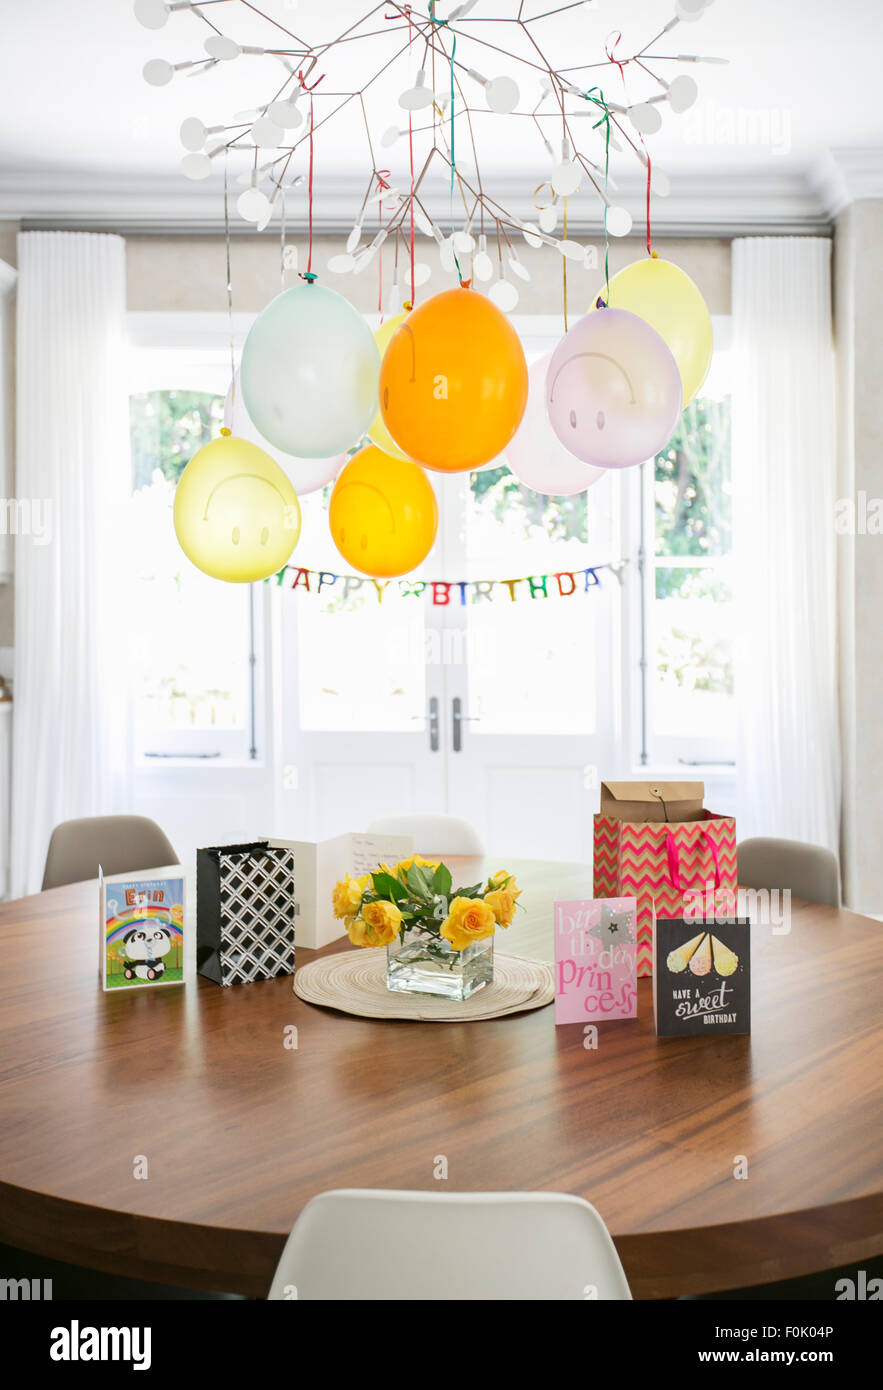 Smiley face balloons and Happy Birthday sign hanging over table with cards Stock Photo